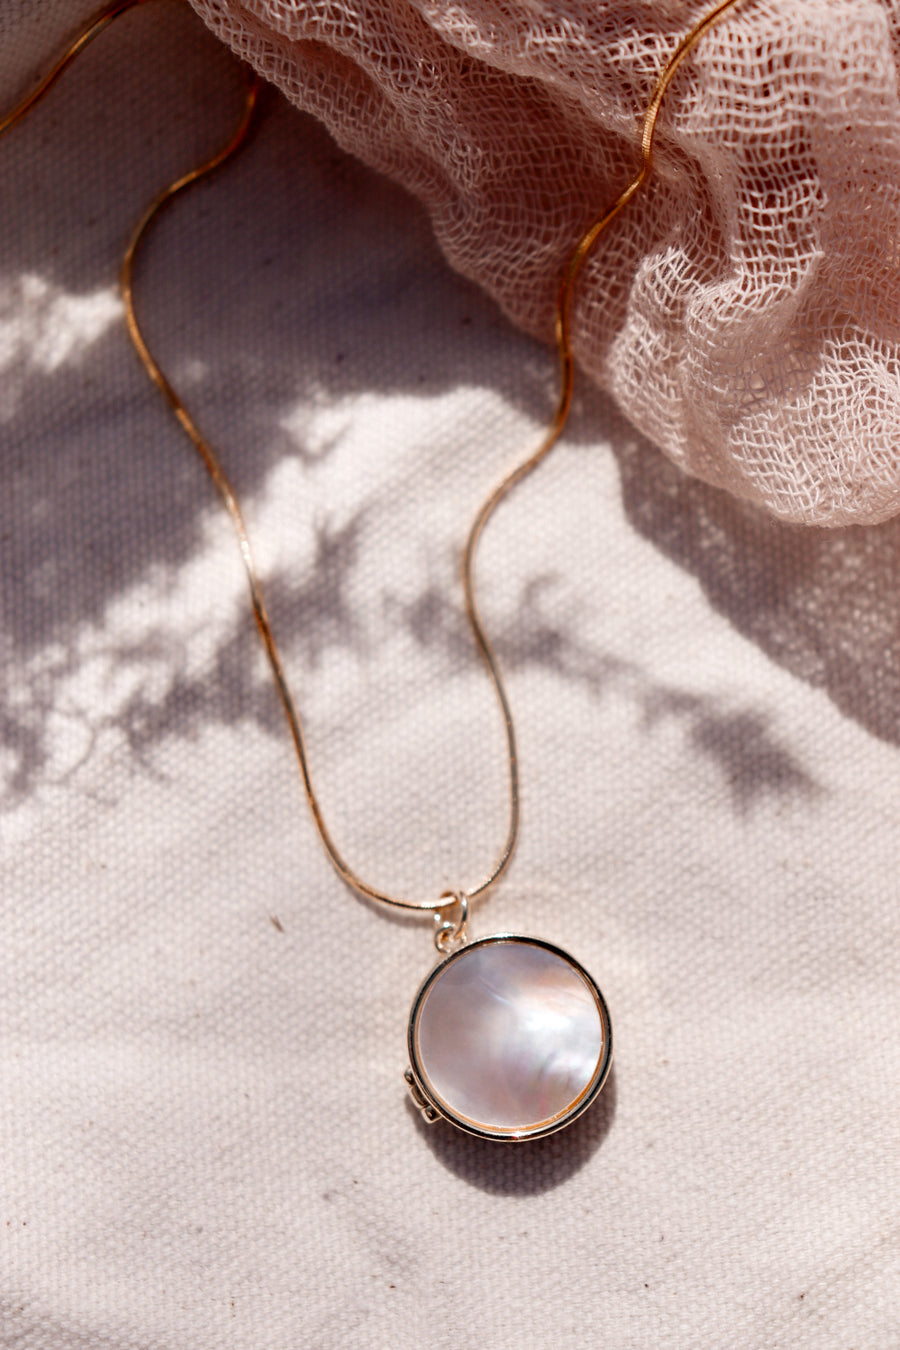 Full moon | mother of pearl intention locket